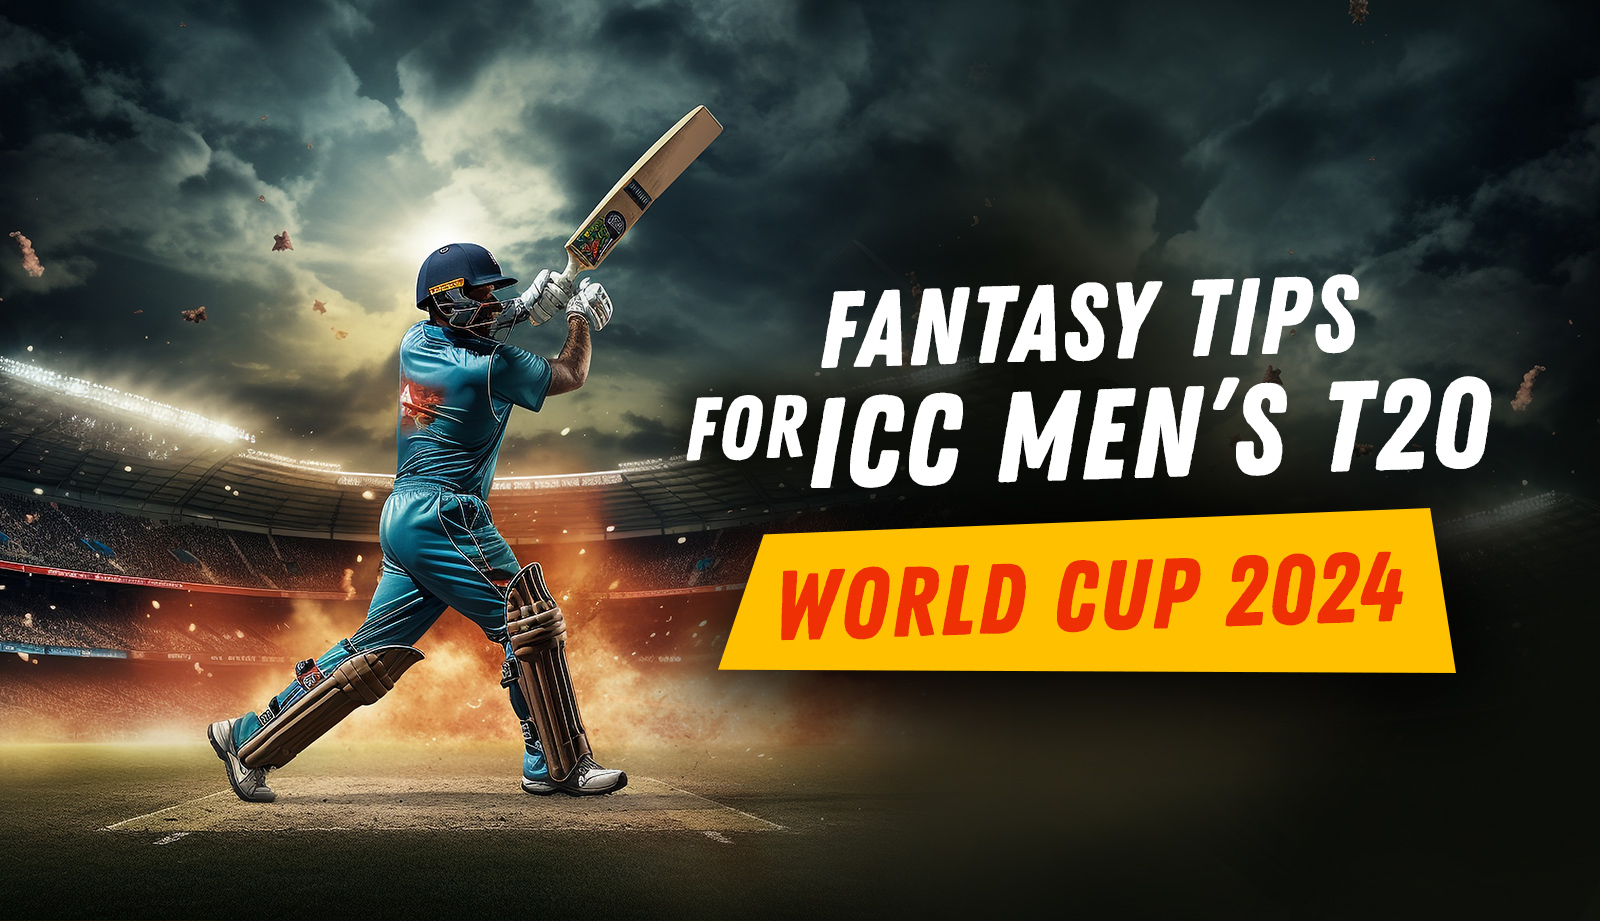 Know-Dates-Groups-and-Venues-of-ICC-Mens-T20-World-Cup-2024-Also-know-the-best-fantasy-cricket-app-for-2024-World-Cup